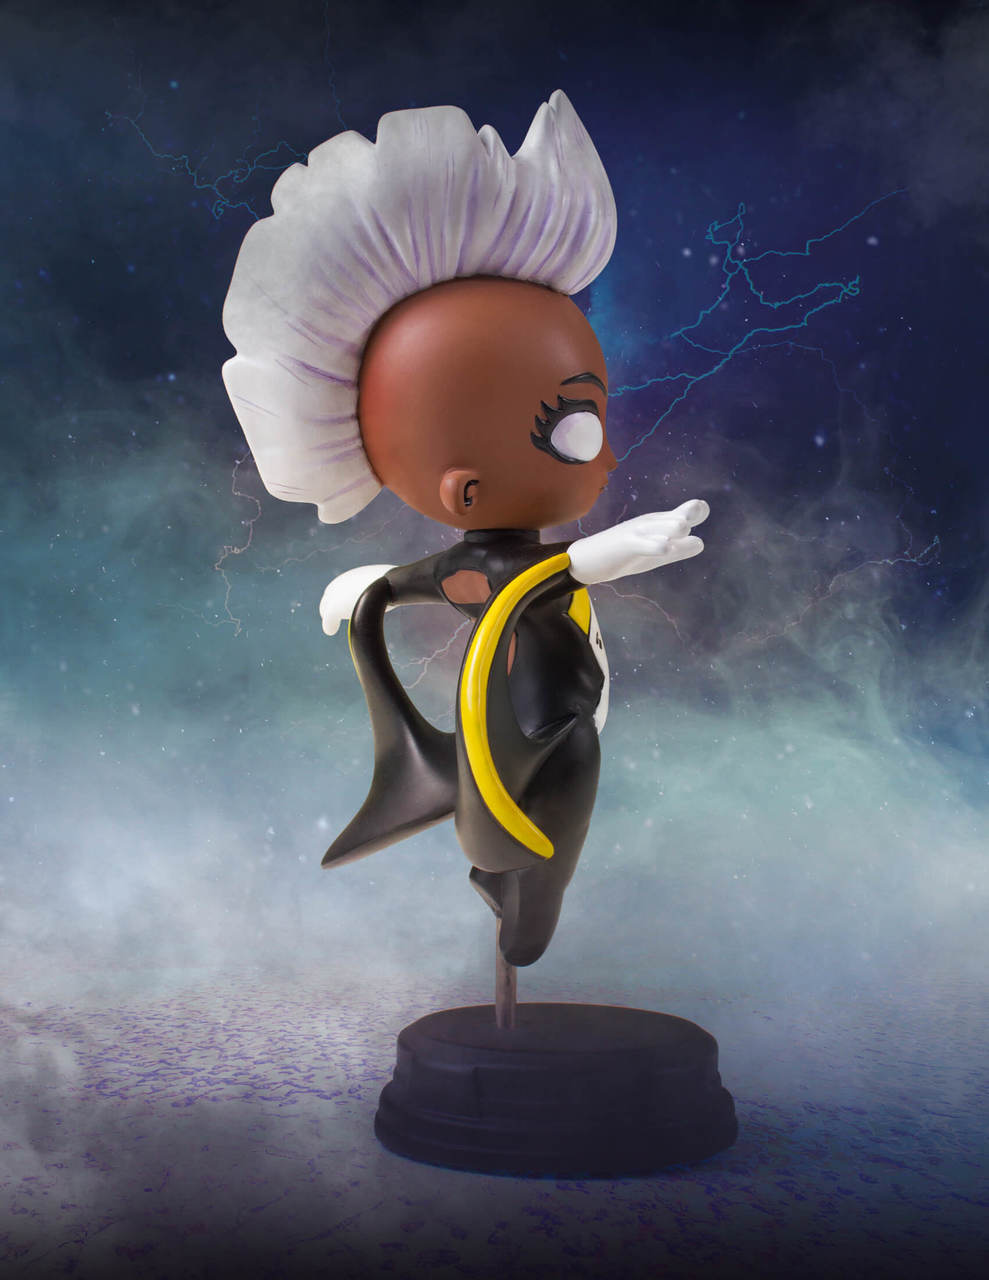 Storm is the Latest Marvel Animated Statue From Gentle Giant